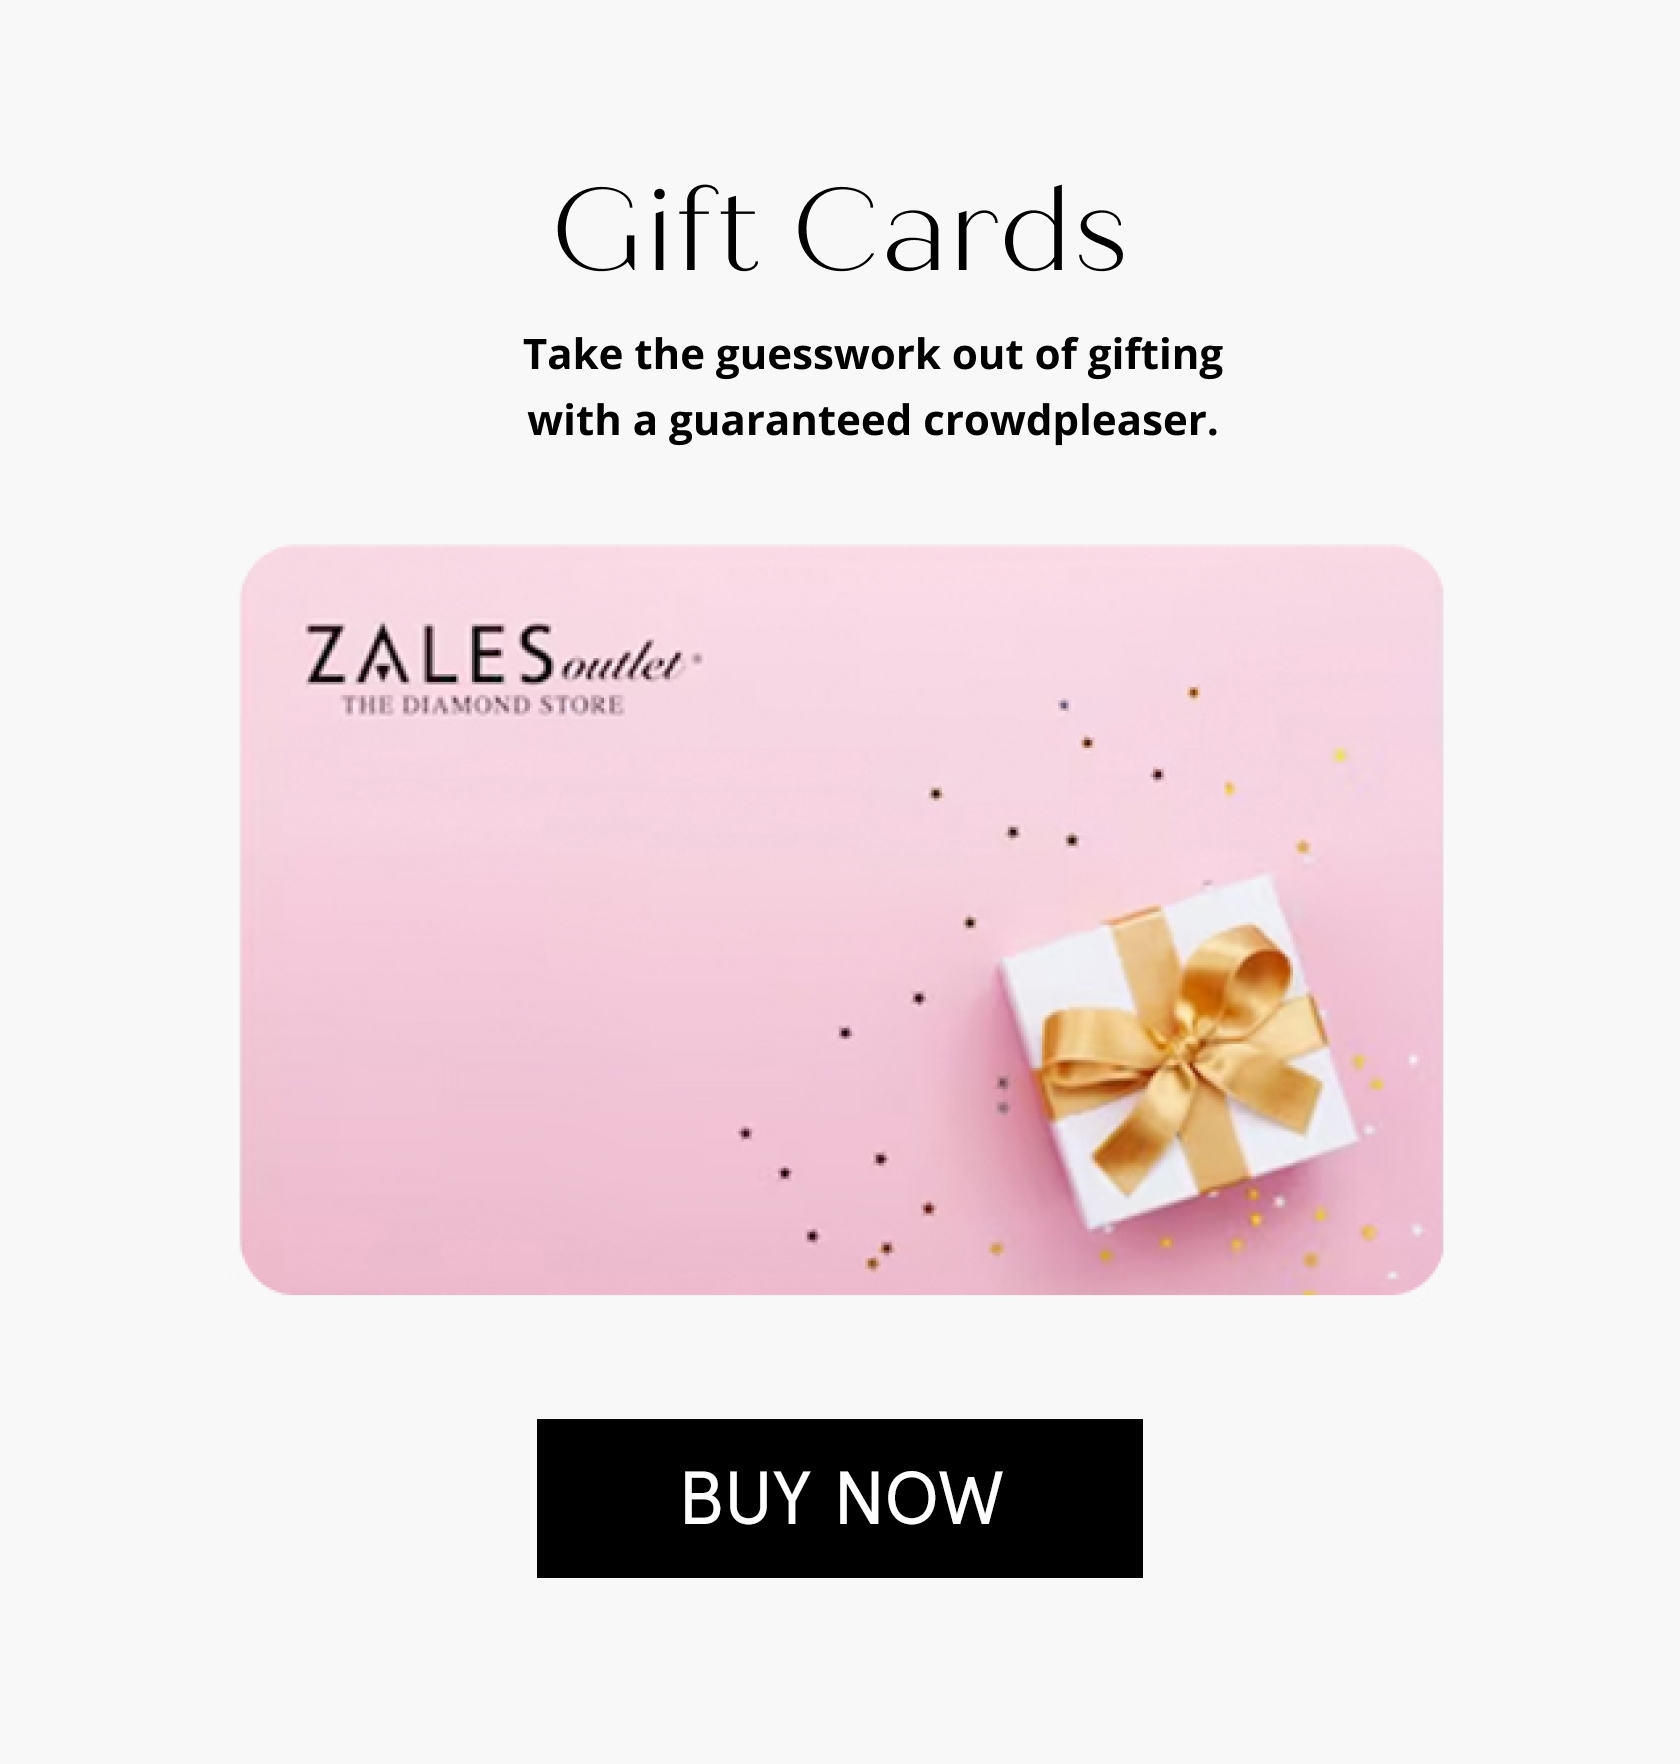 Gift Cards Take the guesswork out of gifting with a guaranteed crowdpleaser. 